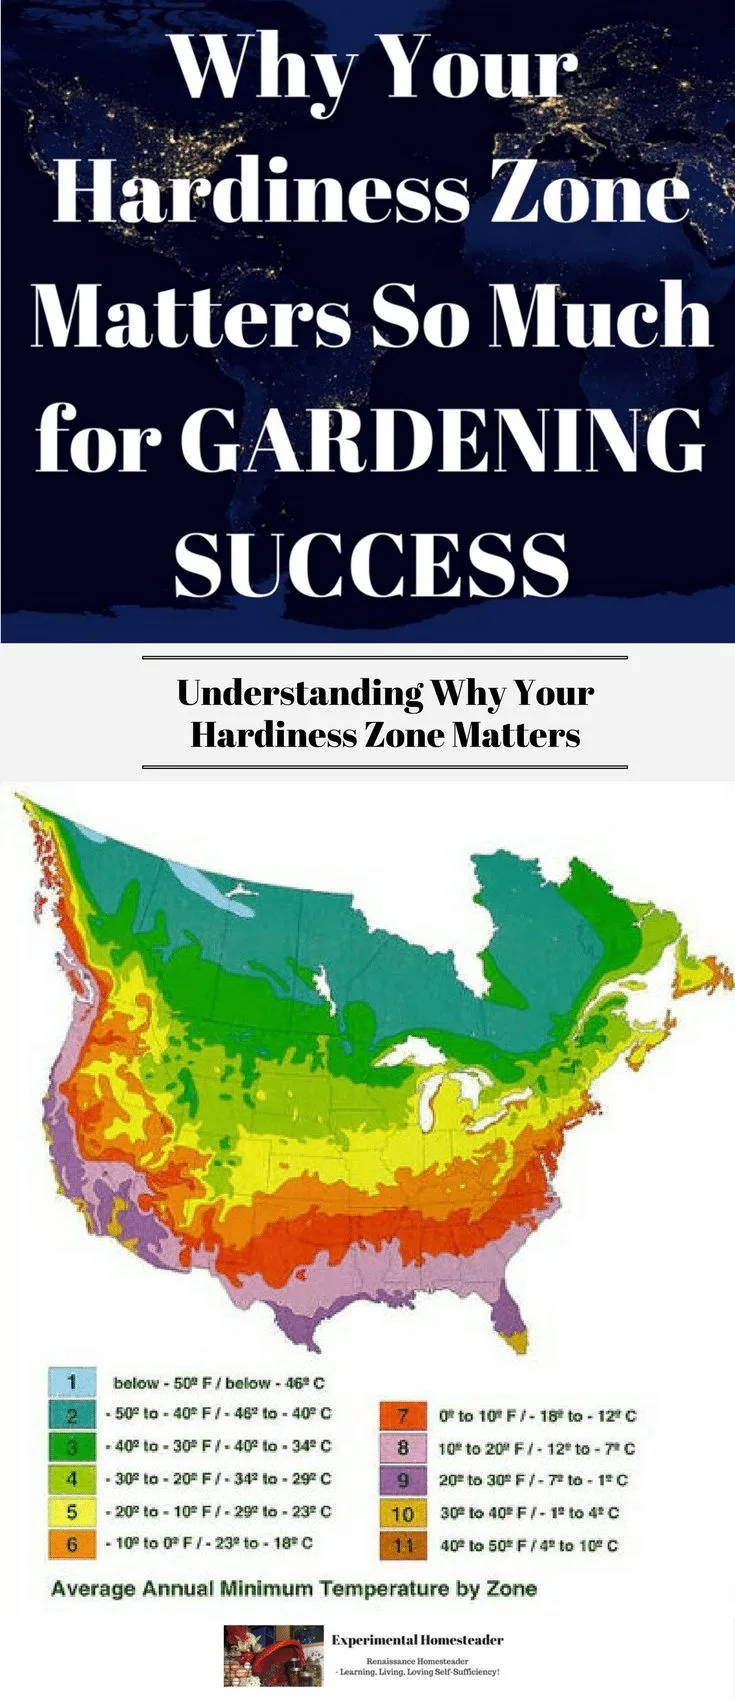 Understanding Why Your Hardiness Zone Matters